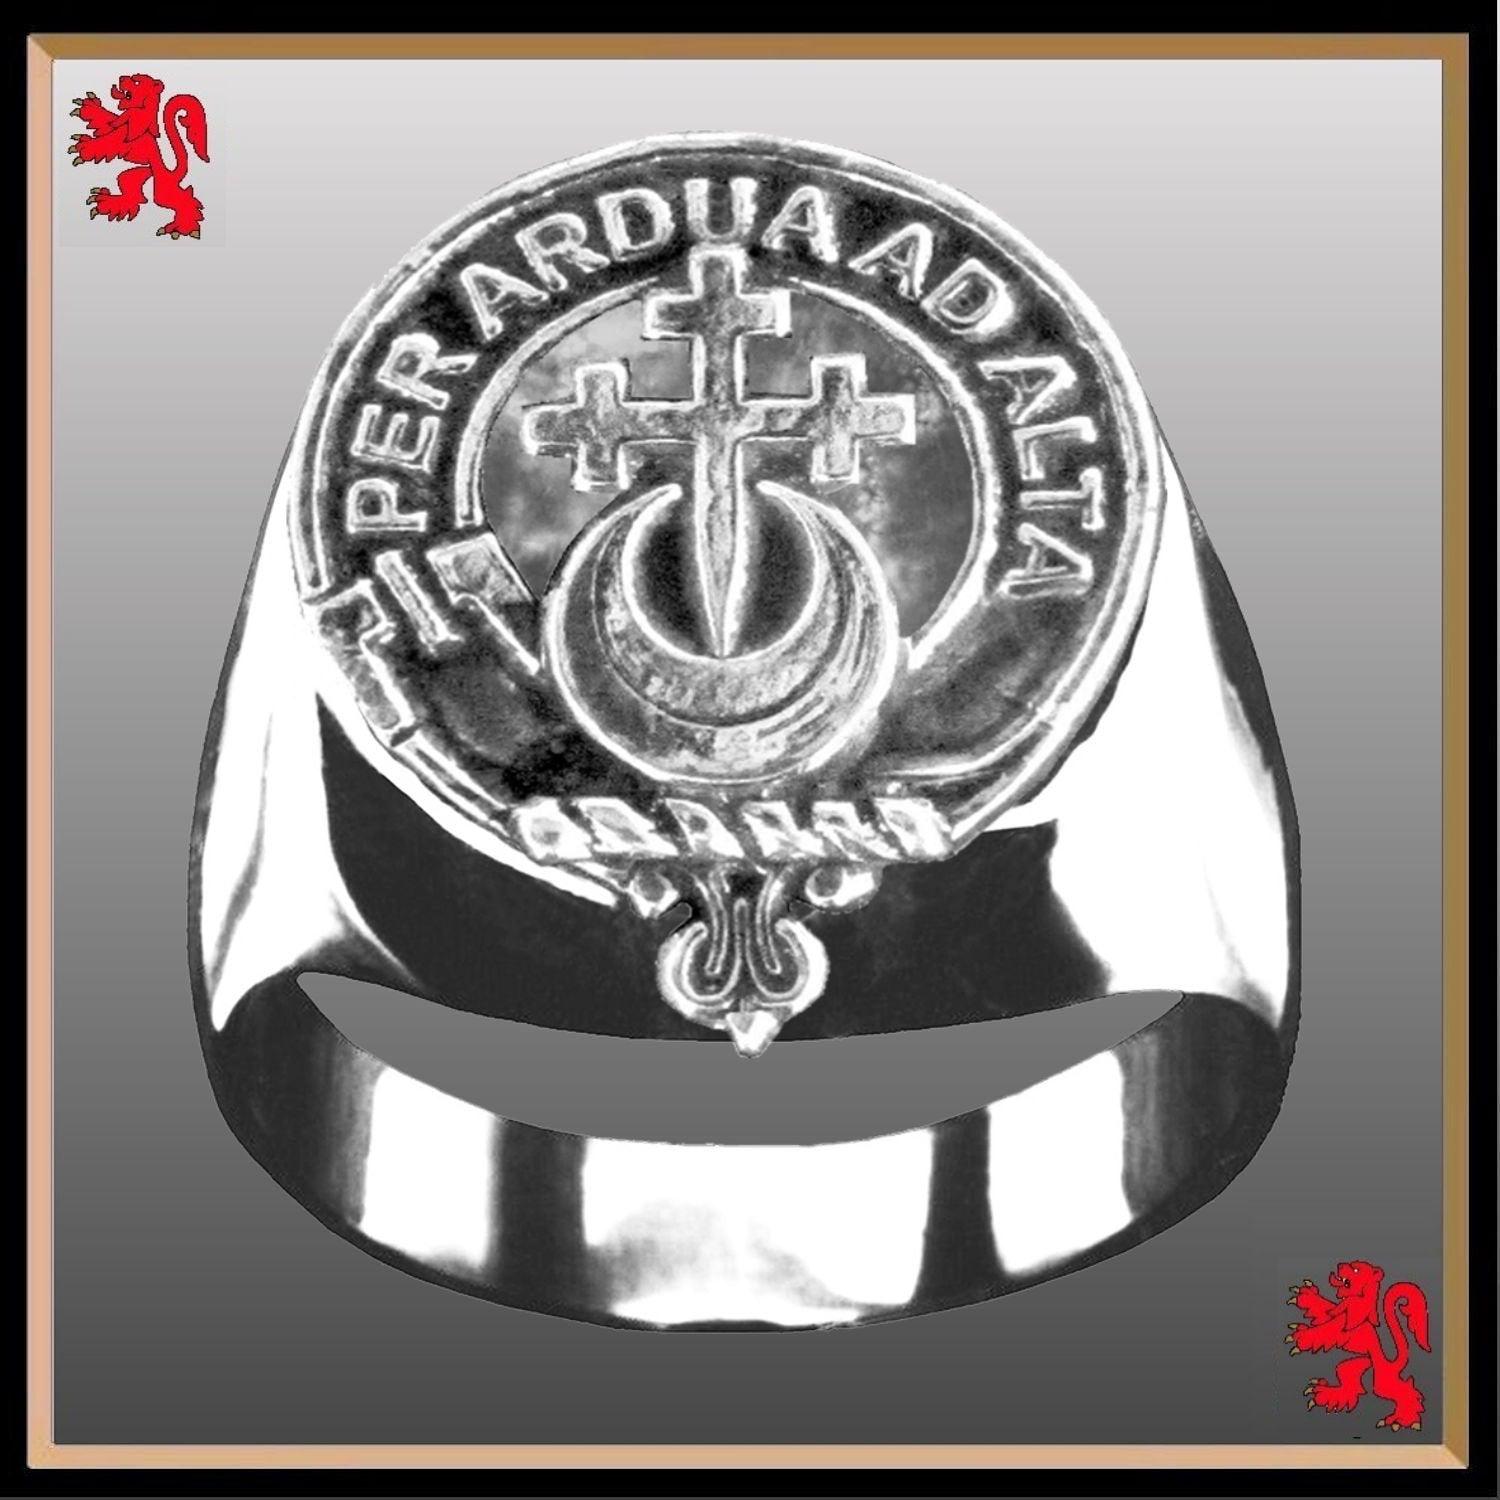 Hannay Scottish Clan Crest Ring GC100  ~  Sterling Silver and Karat Gold